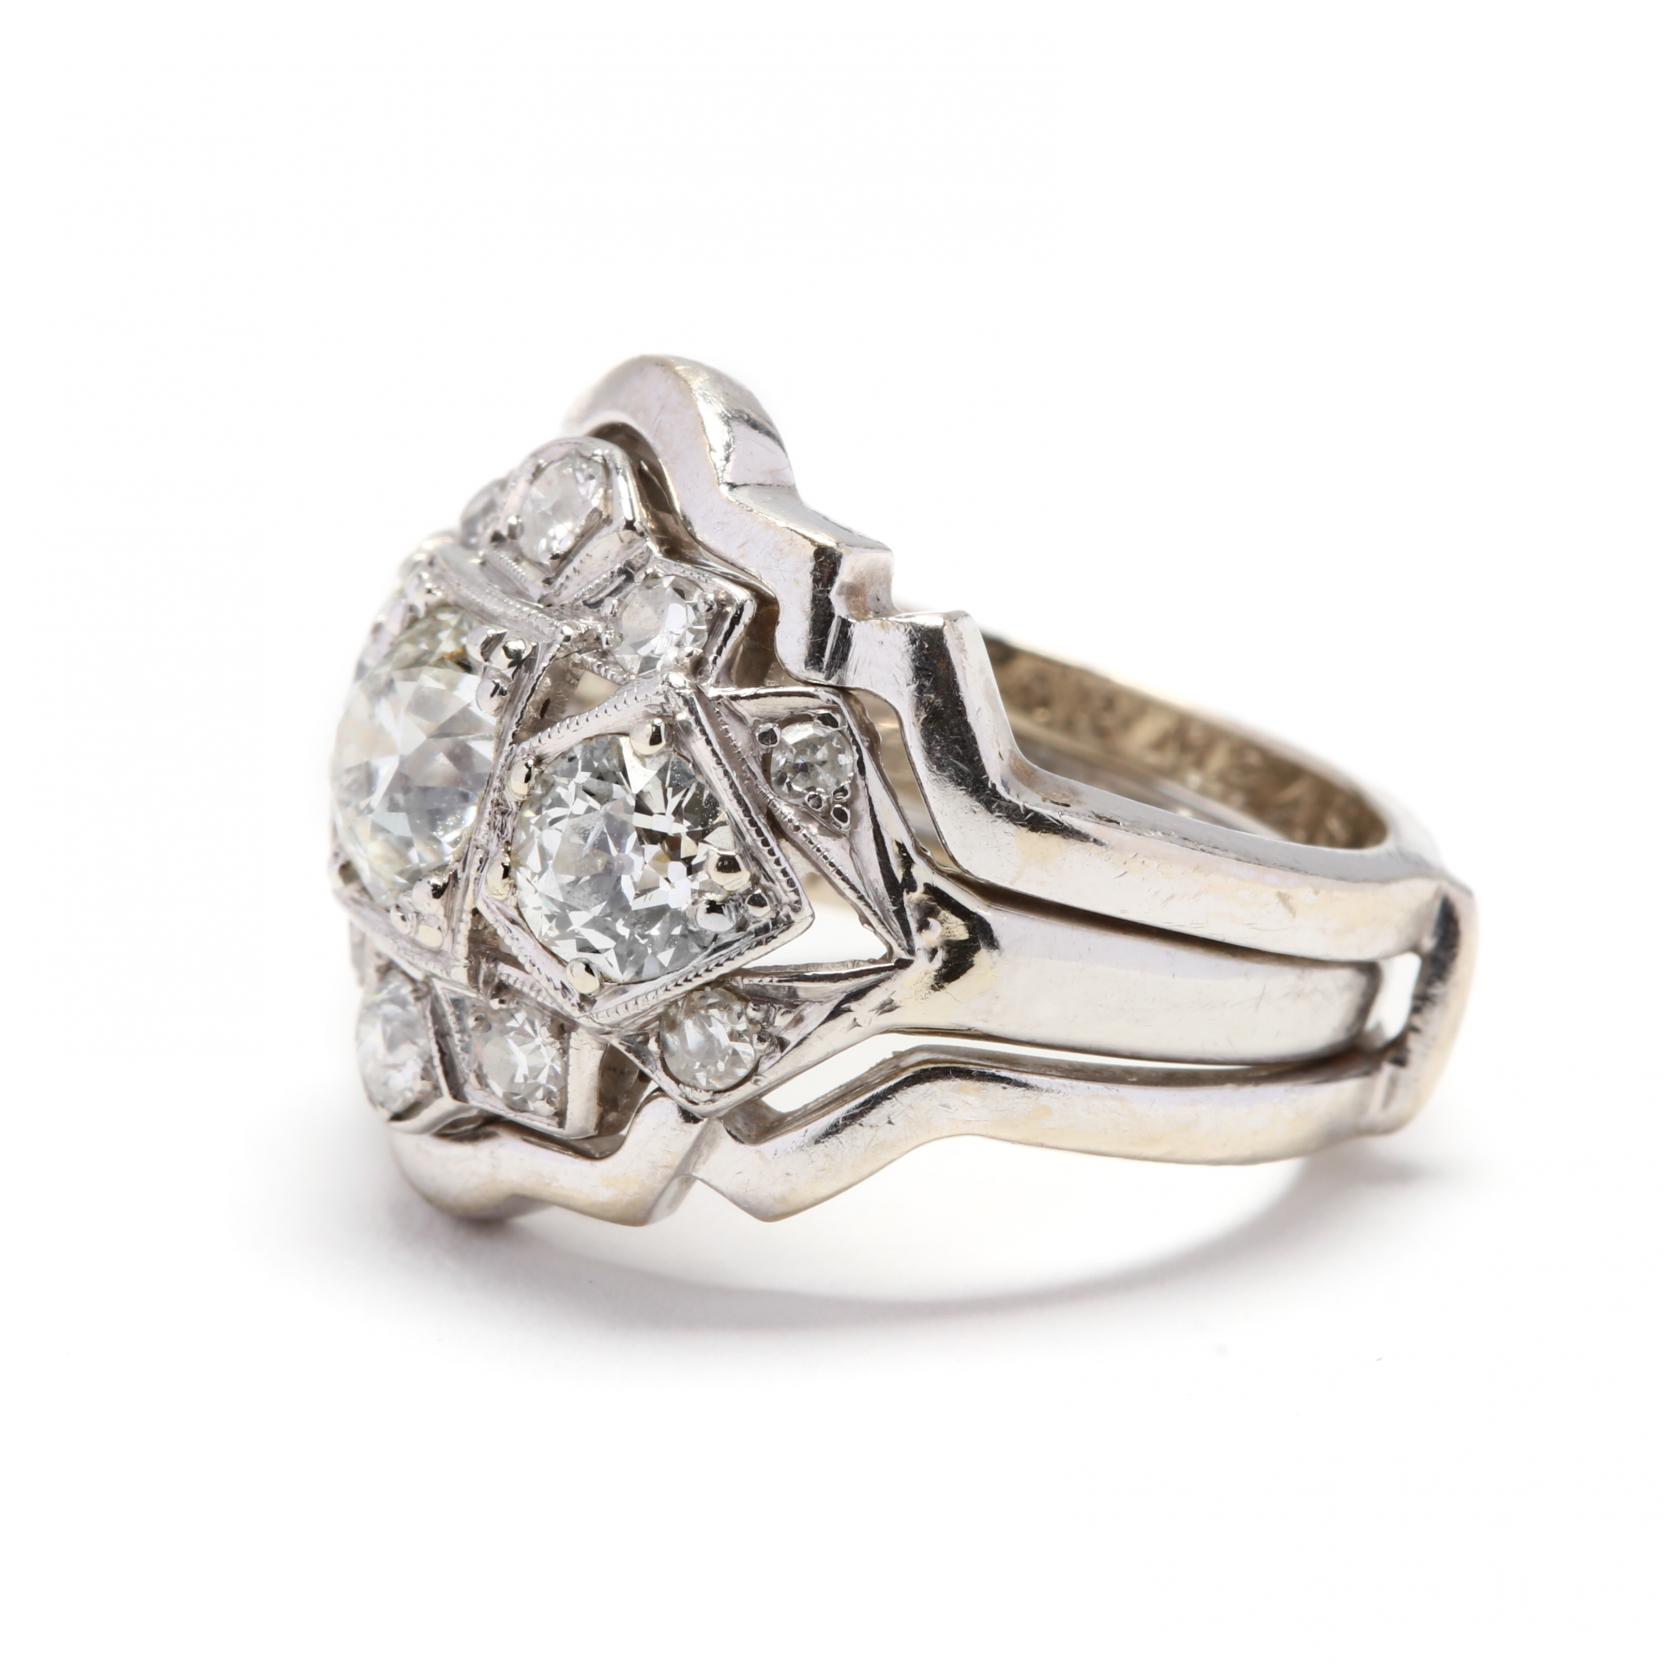 Vintage Platinum and Diamond Ring with 14KT White Gold Jacket - Image 5 of 9